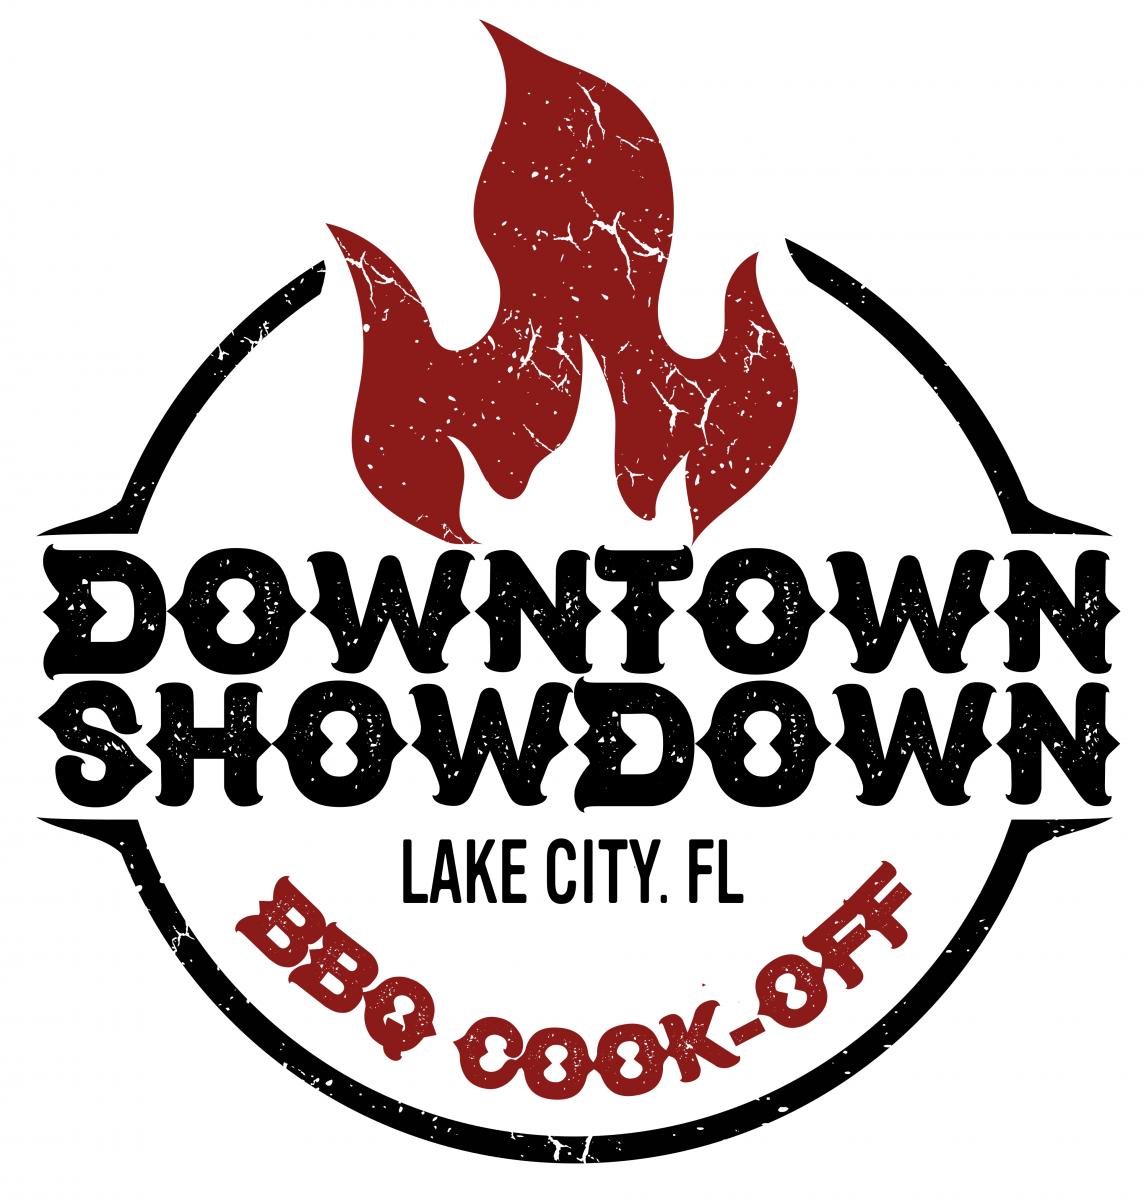 Downtown BBQ Showdown  Cook-Off